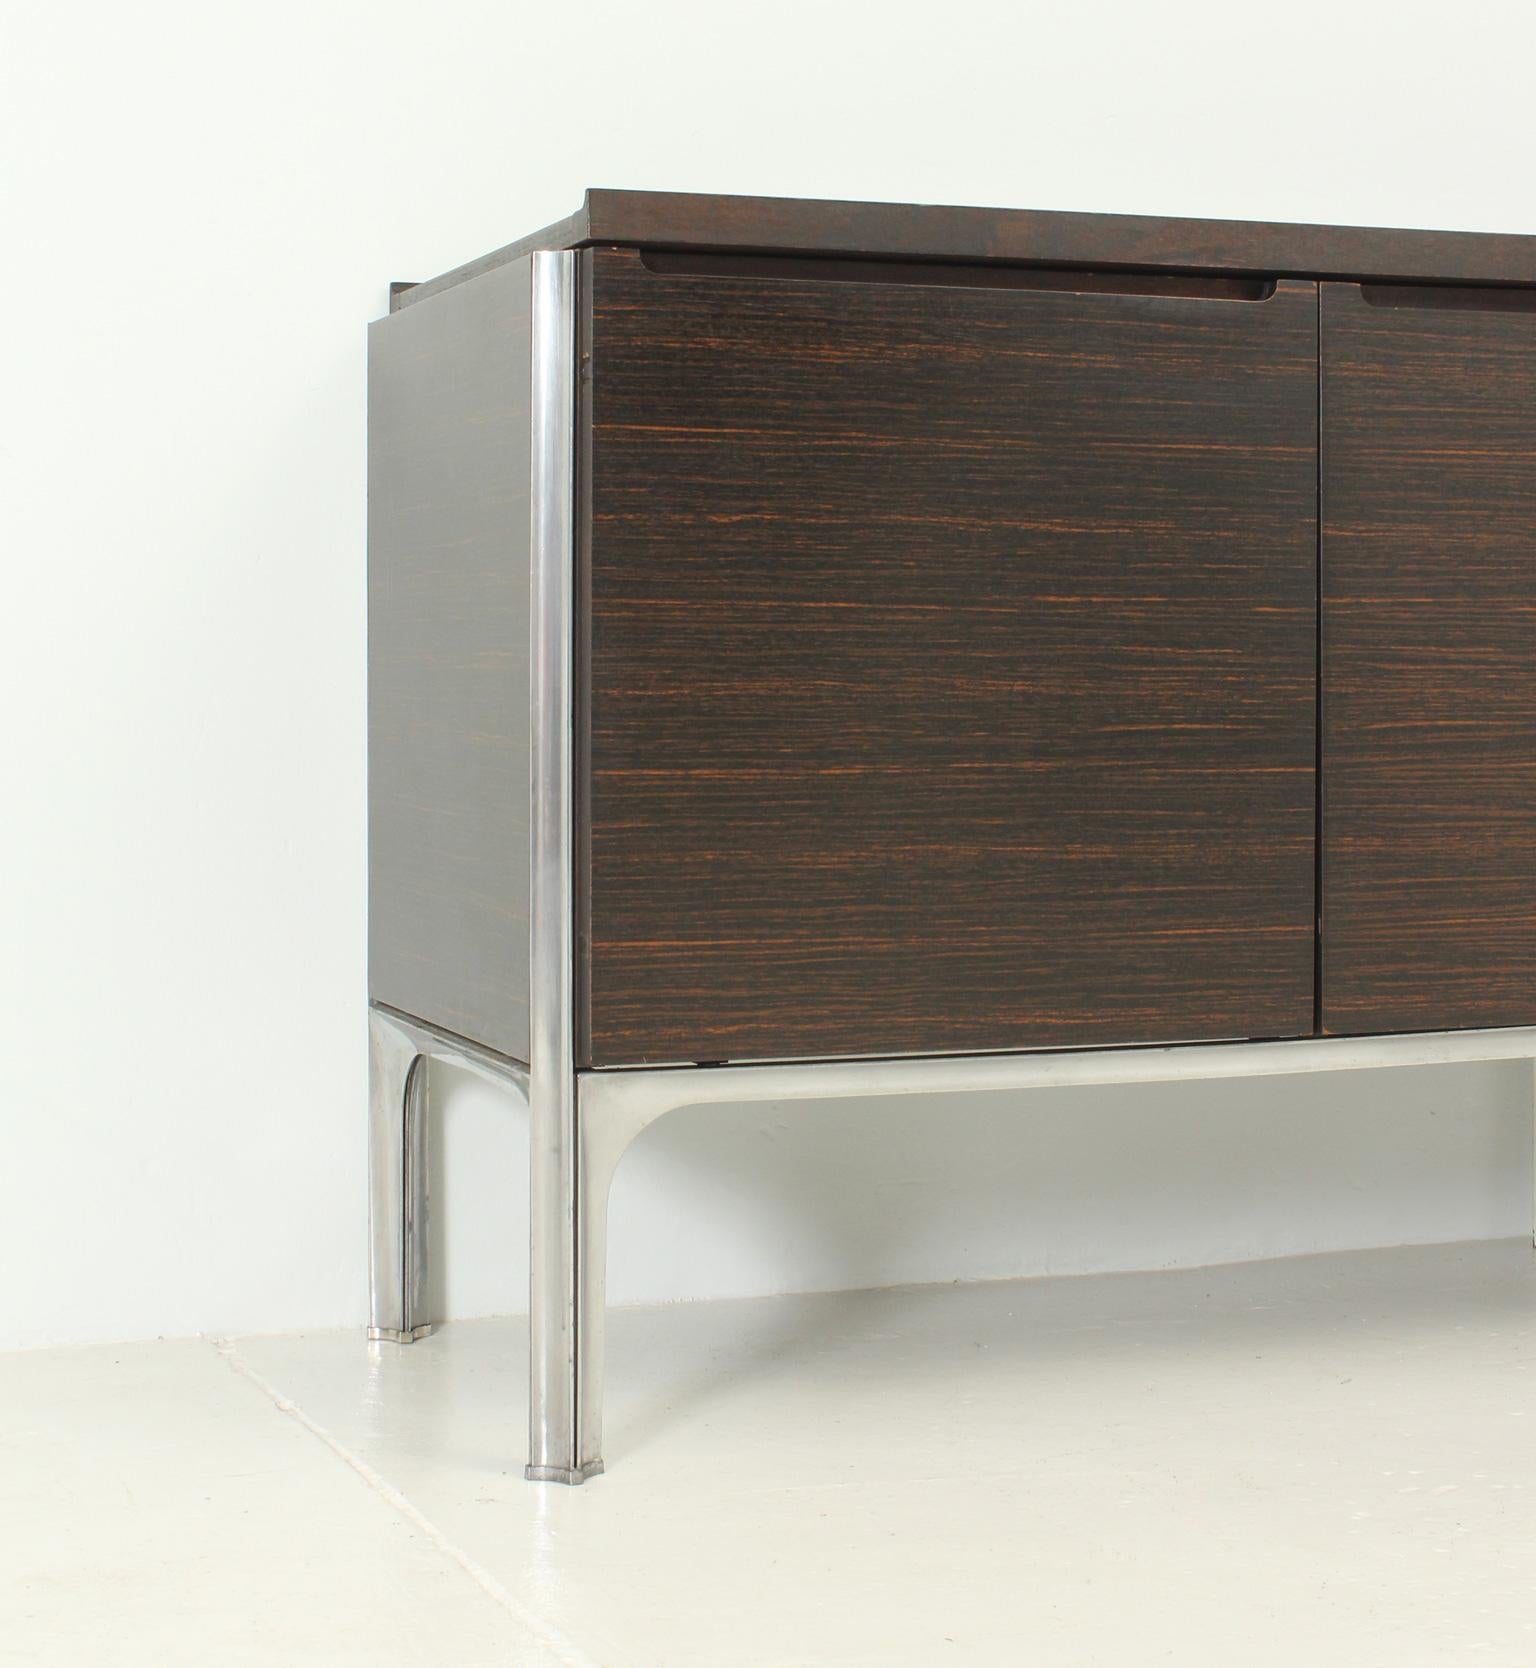 Wood Rare Sideboard by Raymond Loewy edited by DF 2000, 1960s For Sale